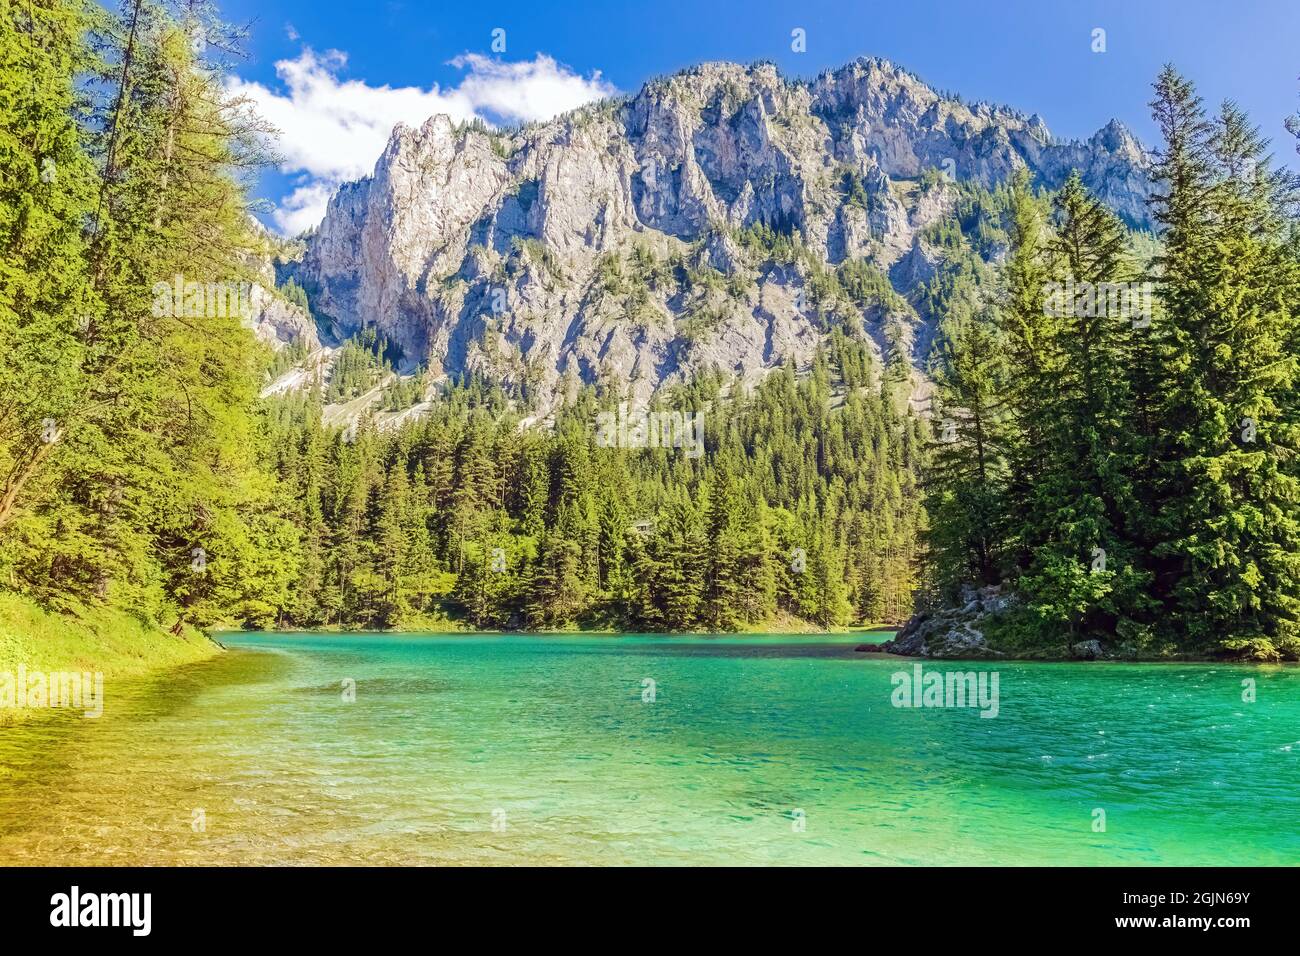 The Green Lake or Gruener See in Styria, Austria Stock Photo